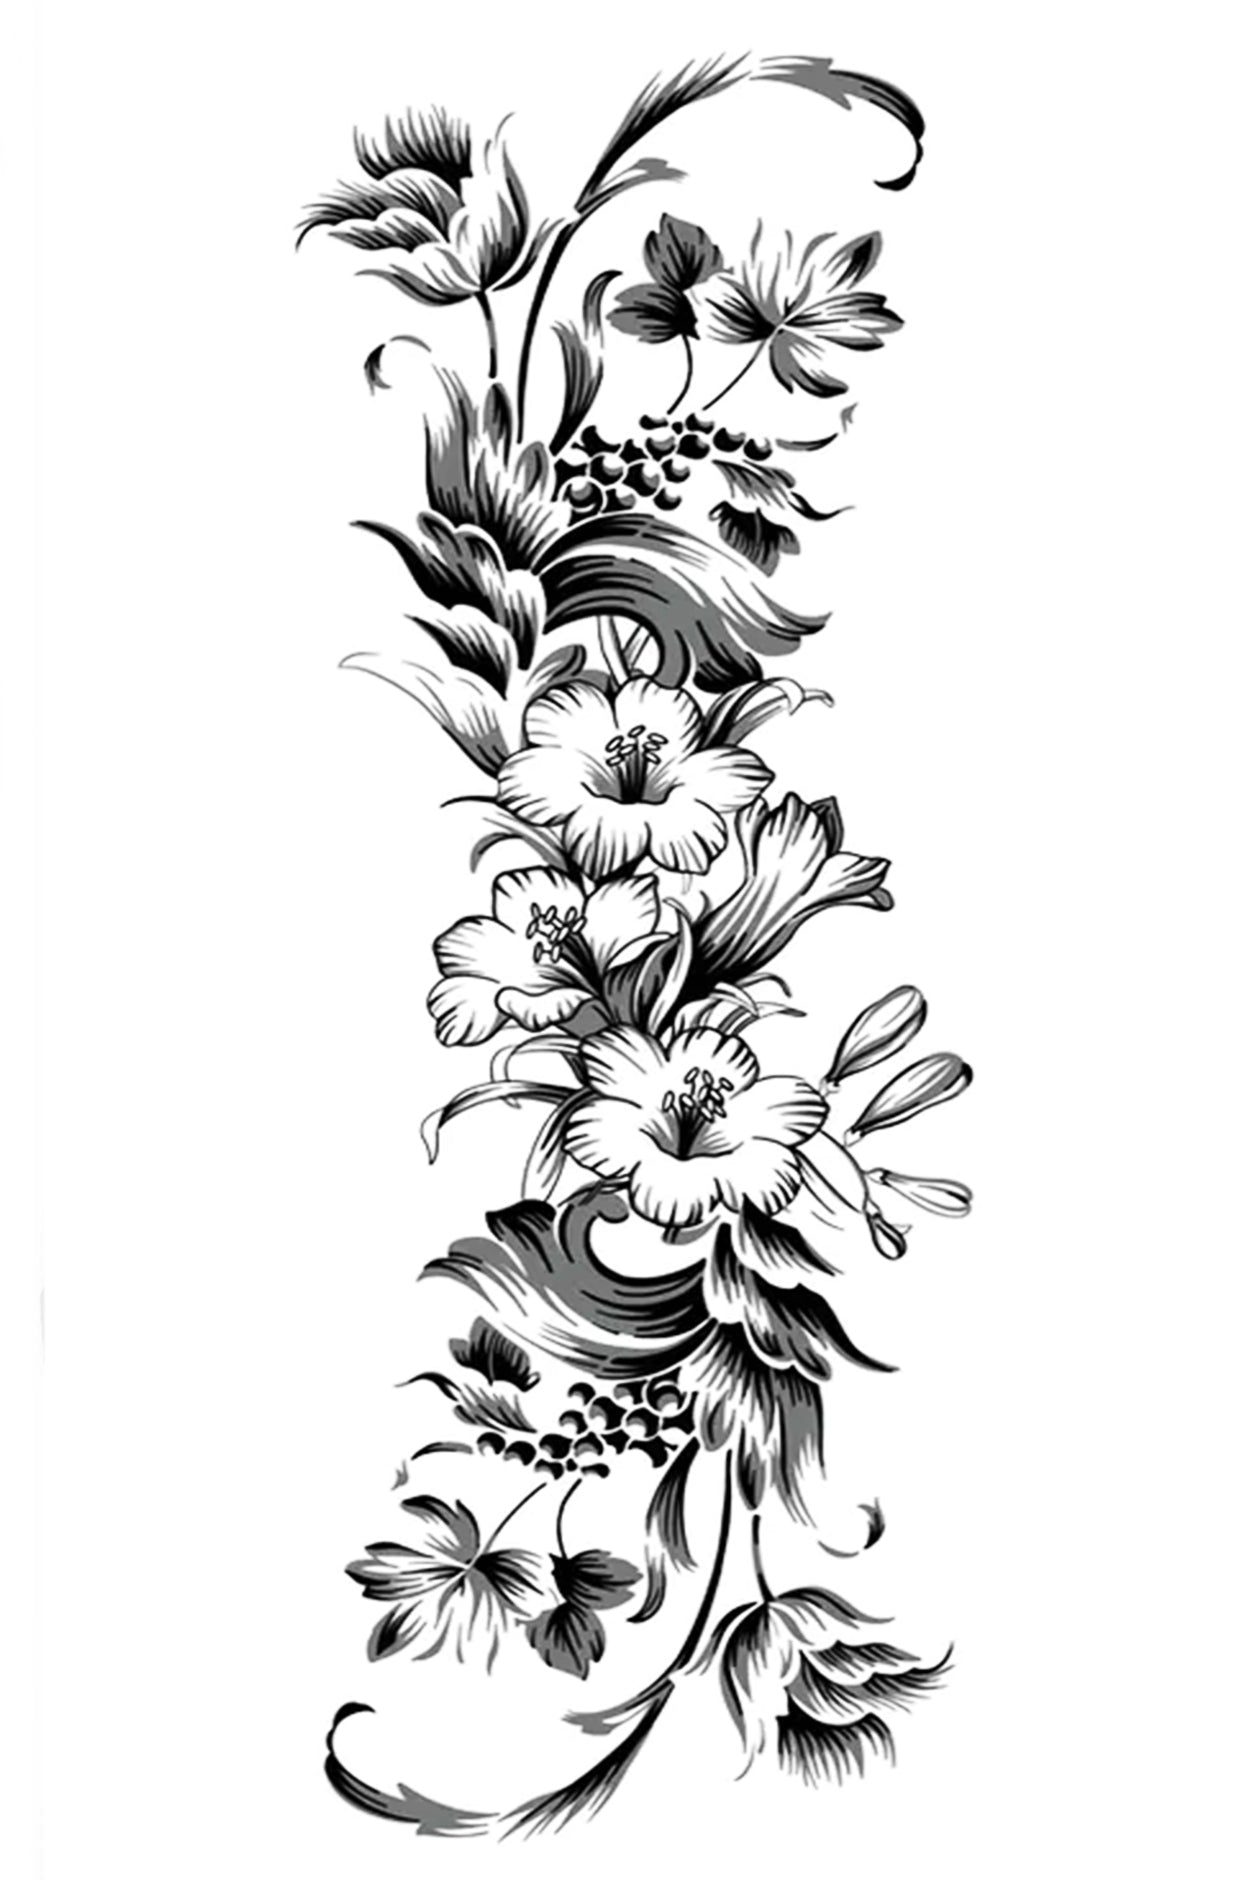 Traditional style tattooing in a long natural asymmetrical strand of flowers. This spray has young blossoms, berries and leaves in an overall scroll shape. It is a perfect welcoming tattoo for a slender arm, leg, or just above the bikini line.